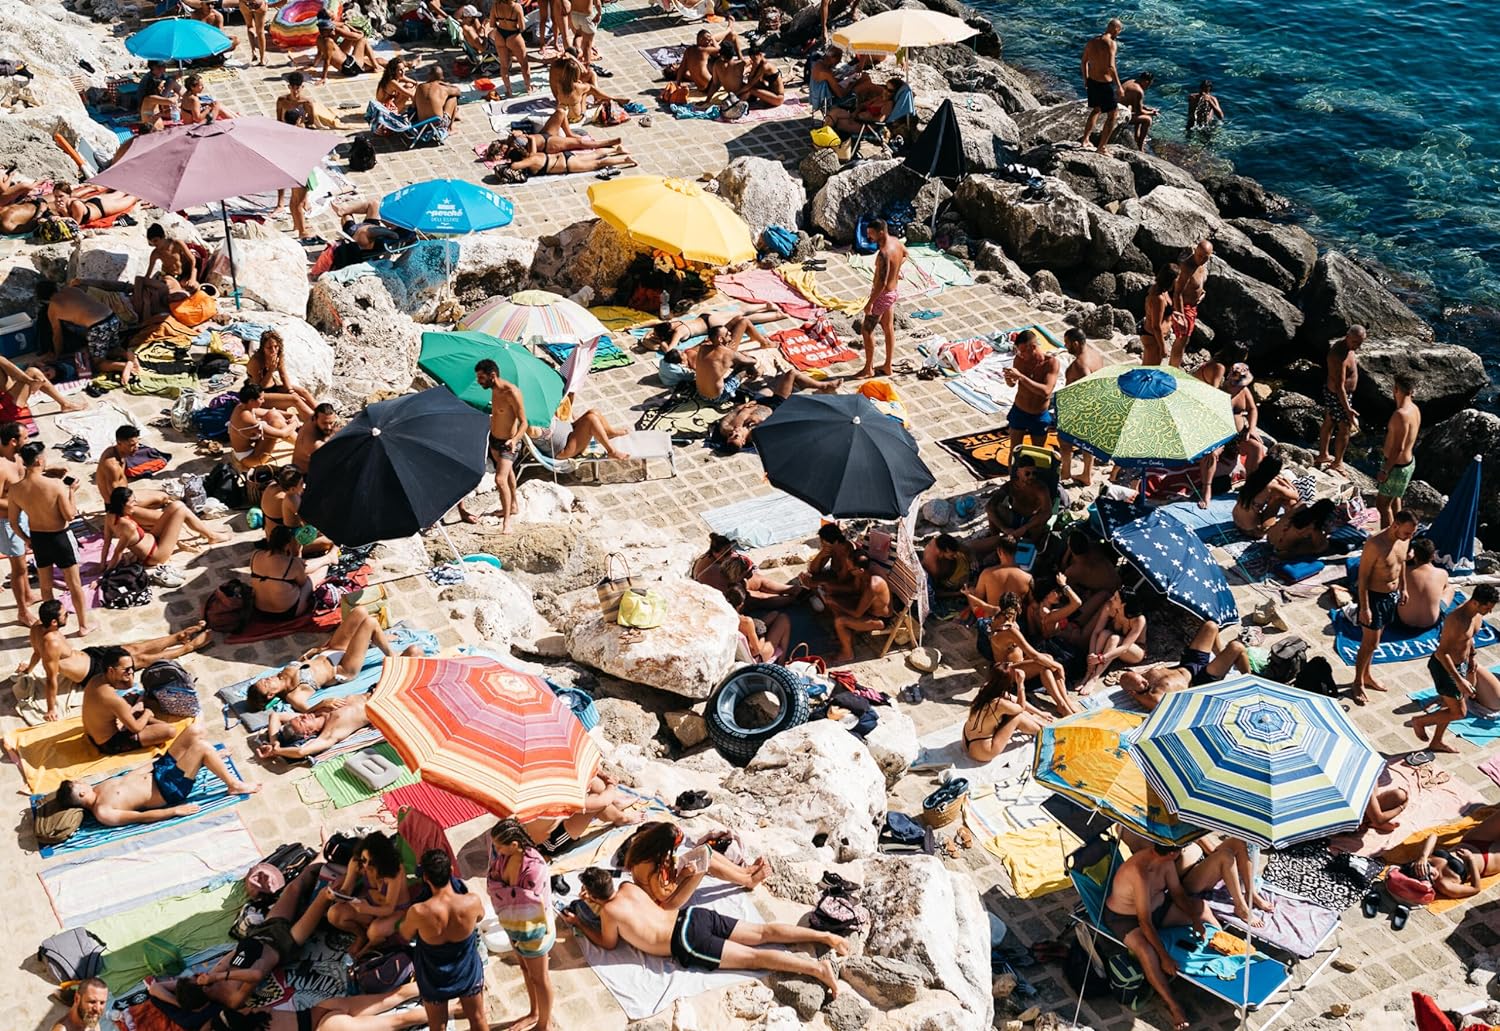 Il Dolce Far Niente - The Italian Way of Summer